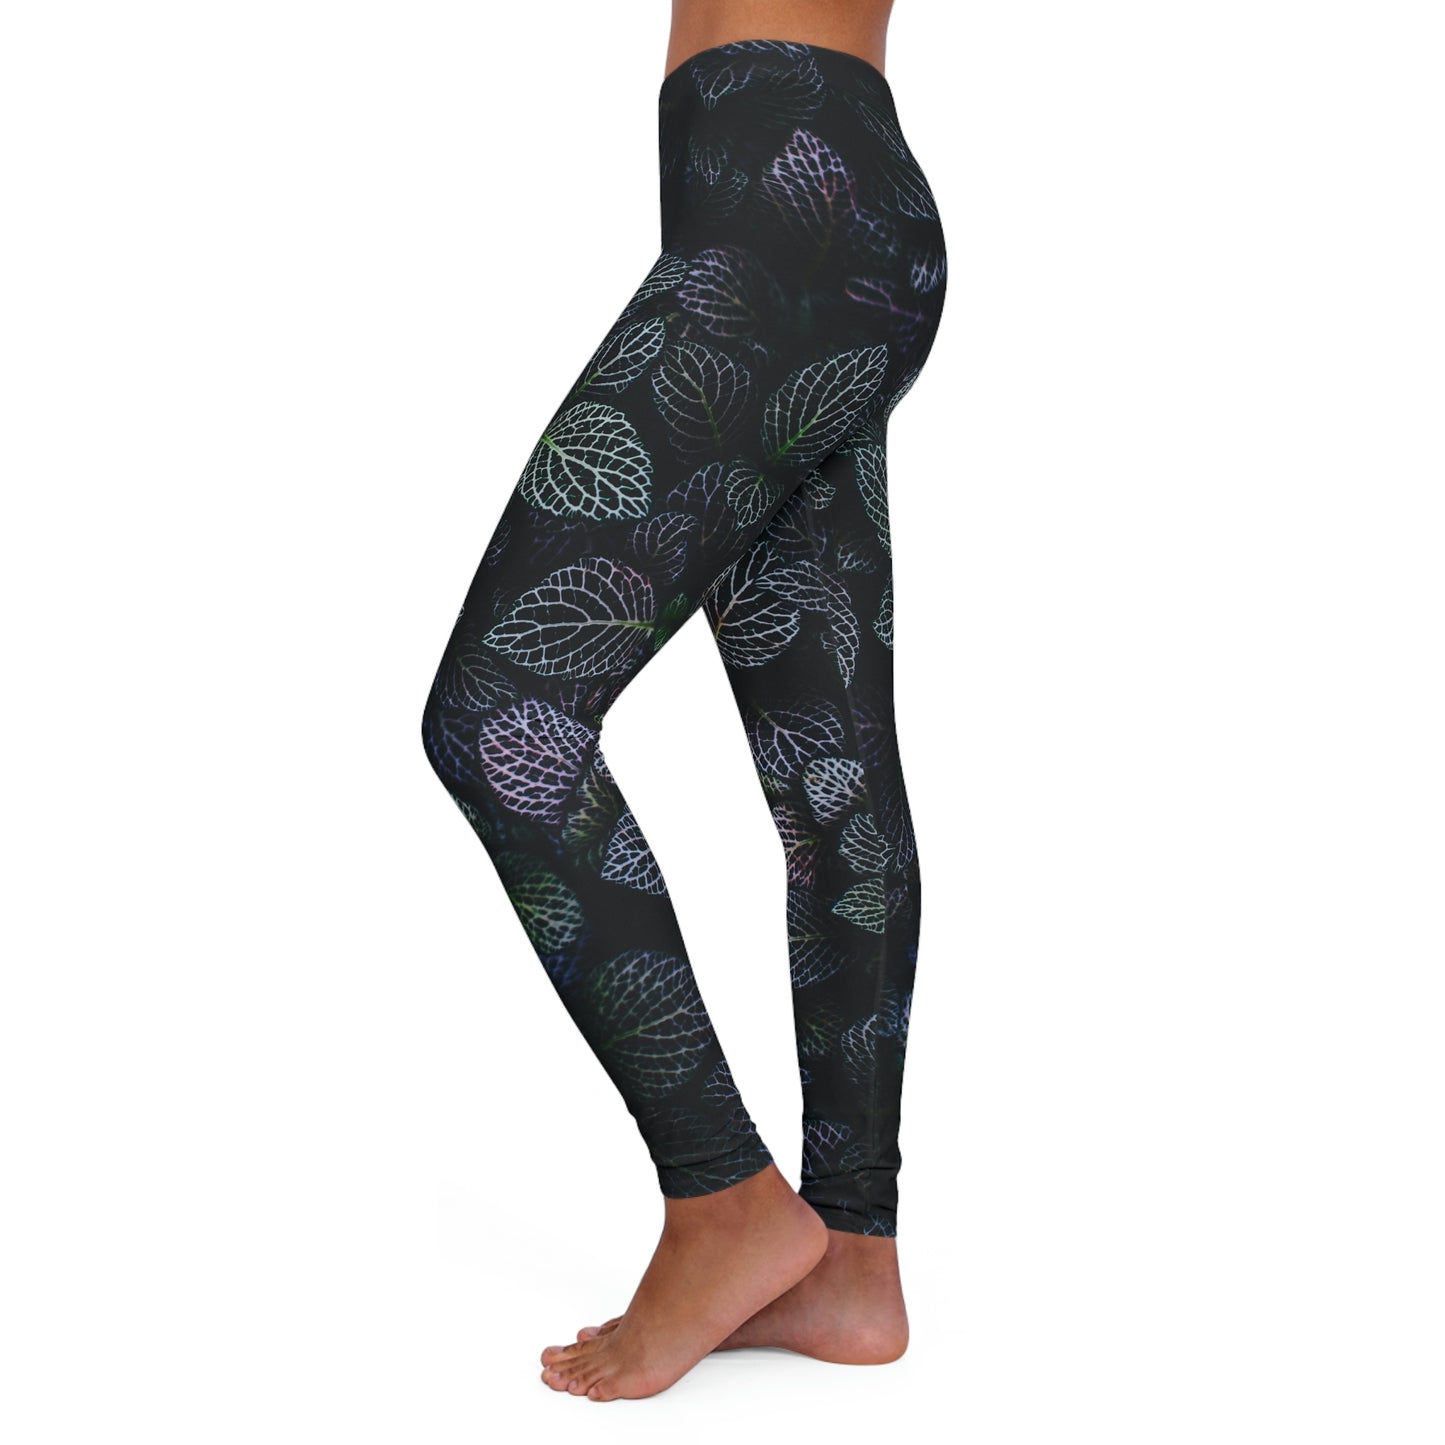 Fall Leaves Plus Size Leggings Cute Leggings, One of a Kind Gift - Workout Activewear tights for Mothers Day, Girlfriend